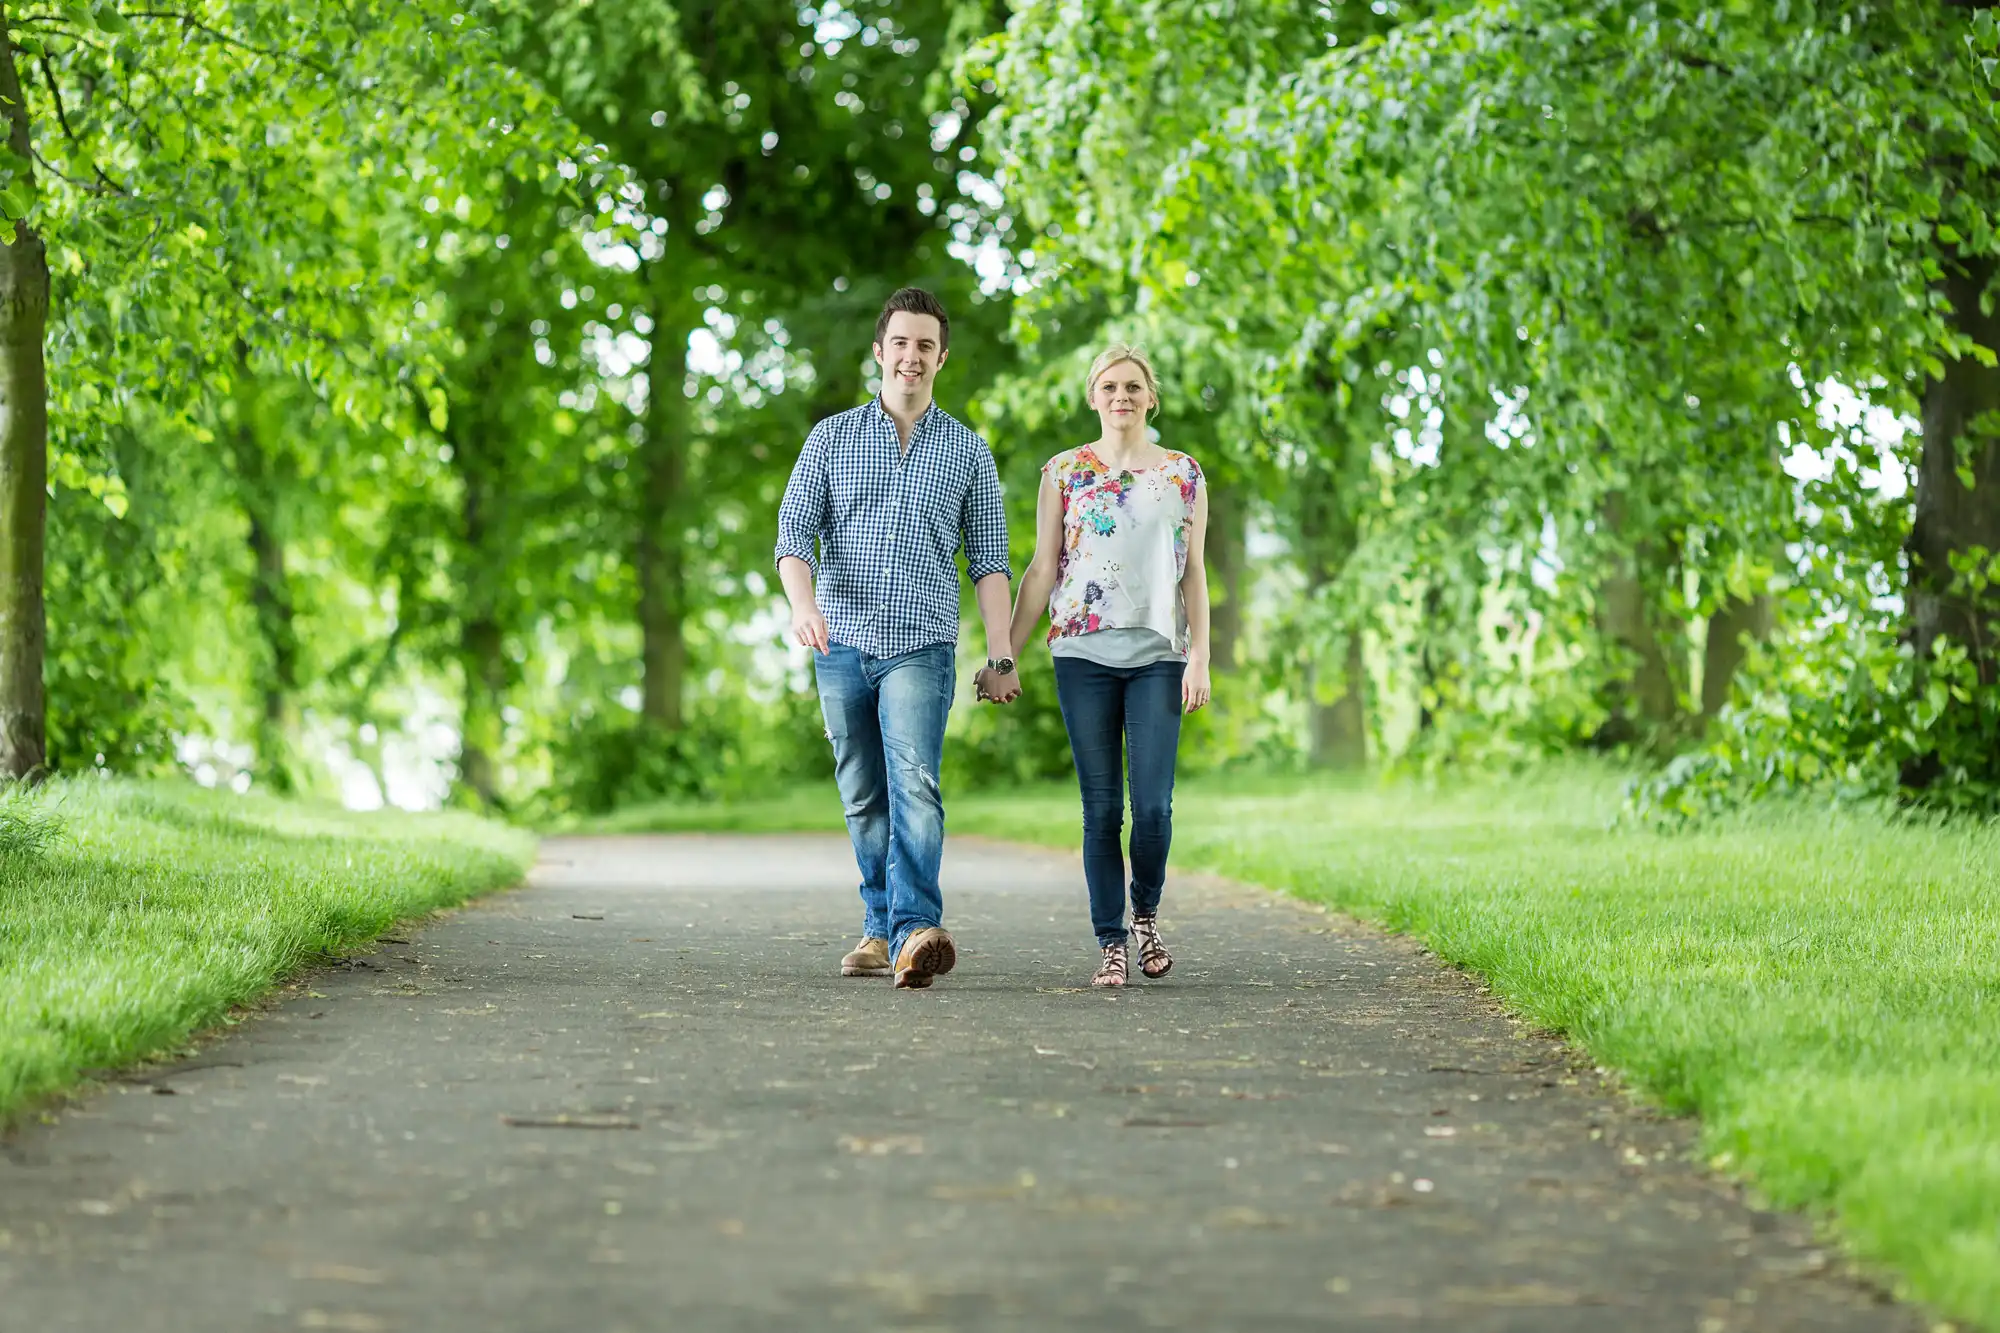 A man and a woman walking happily together down a tree-lined path in a lush green park.